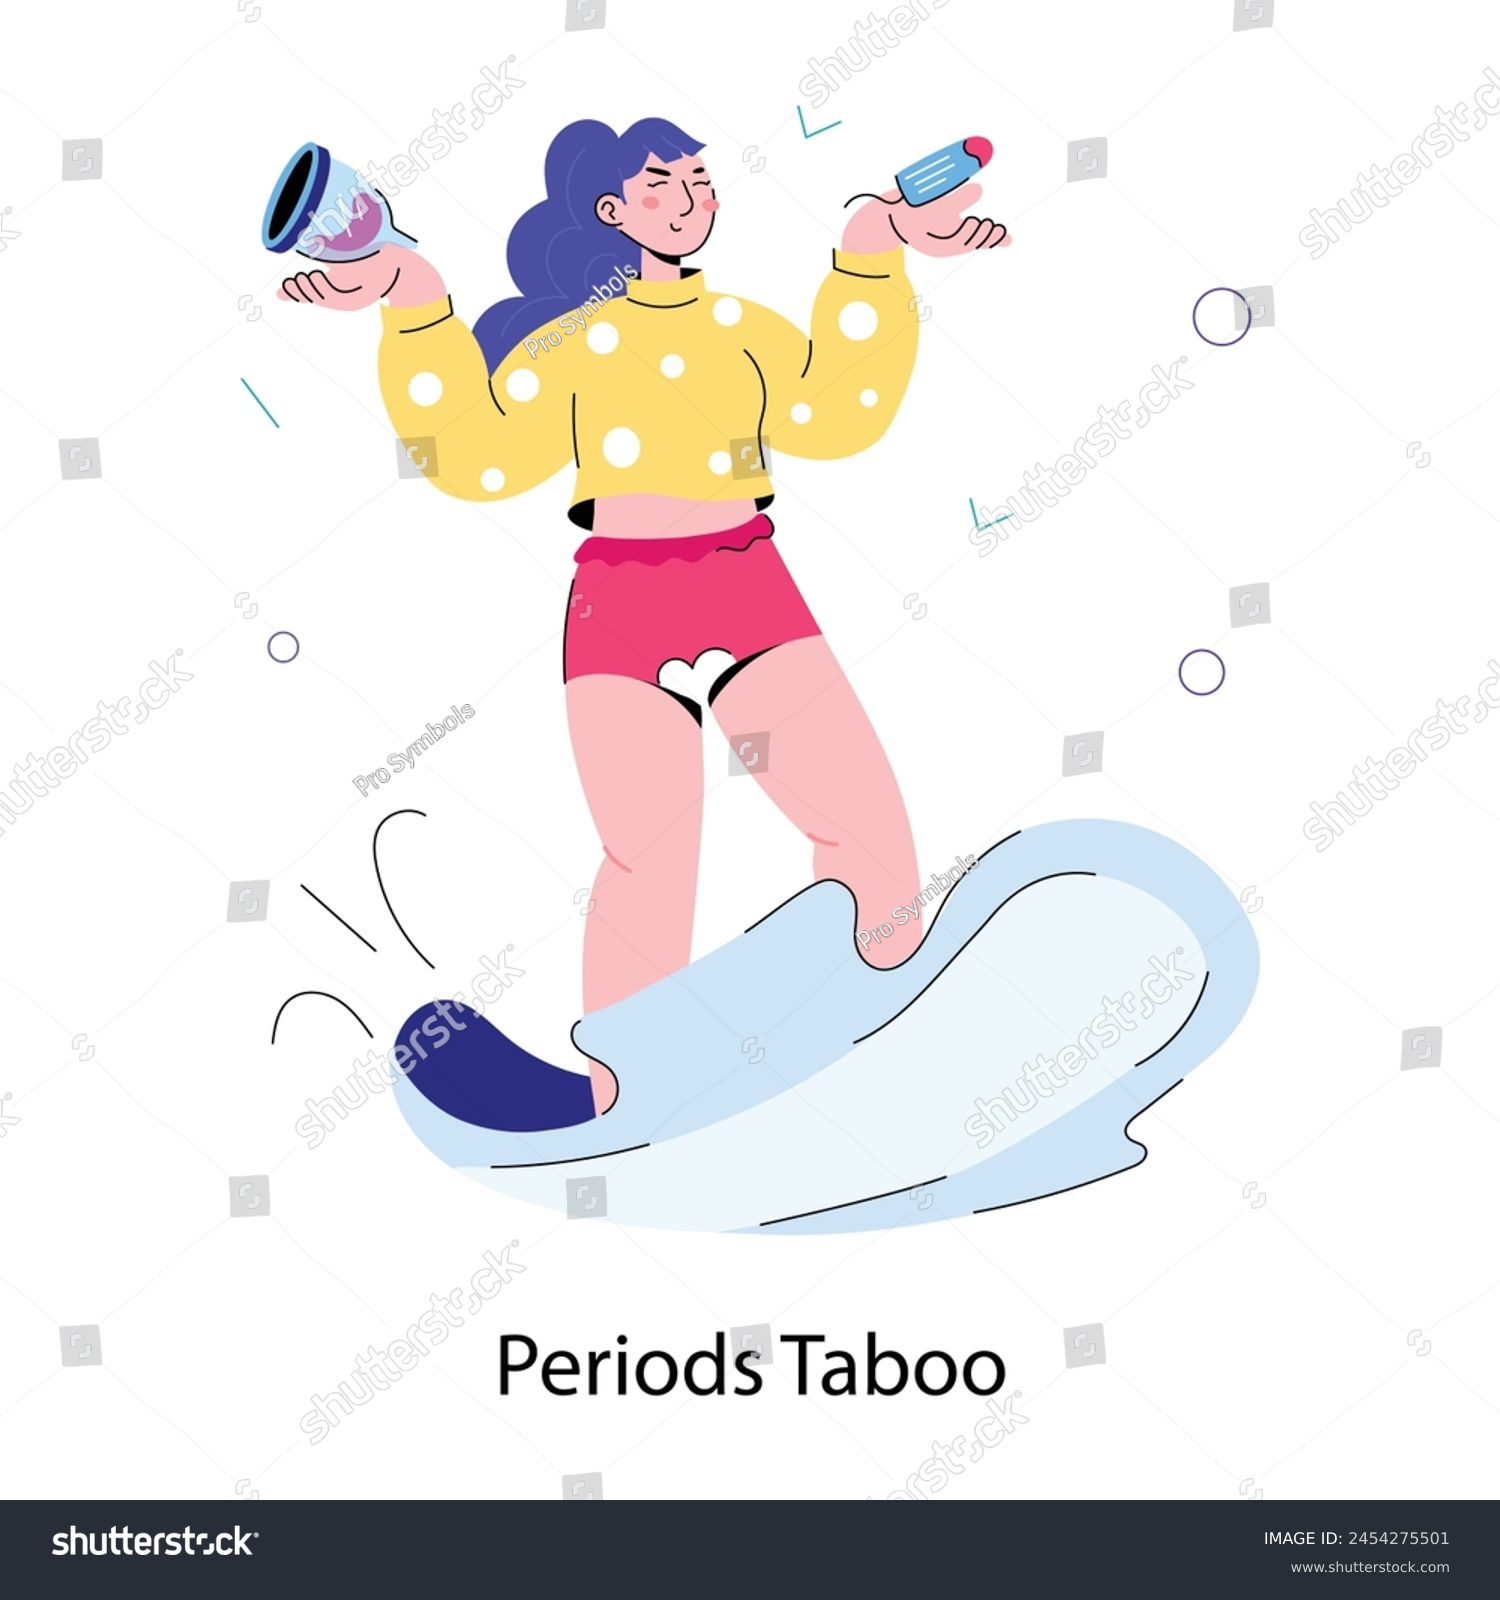 SVG of A hand drawn mini illustration of periods taboo svg